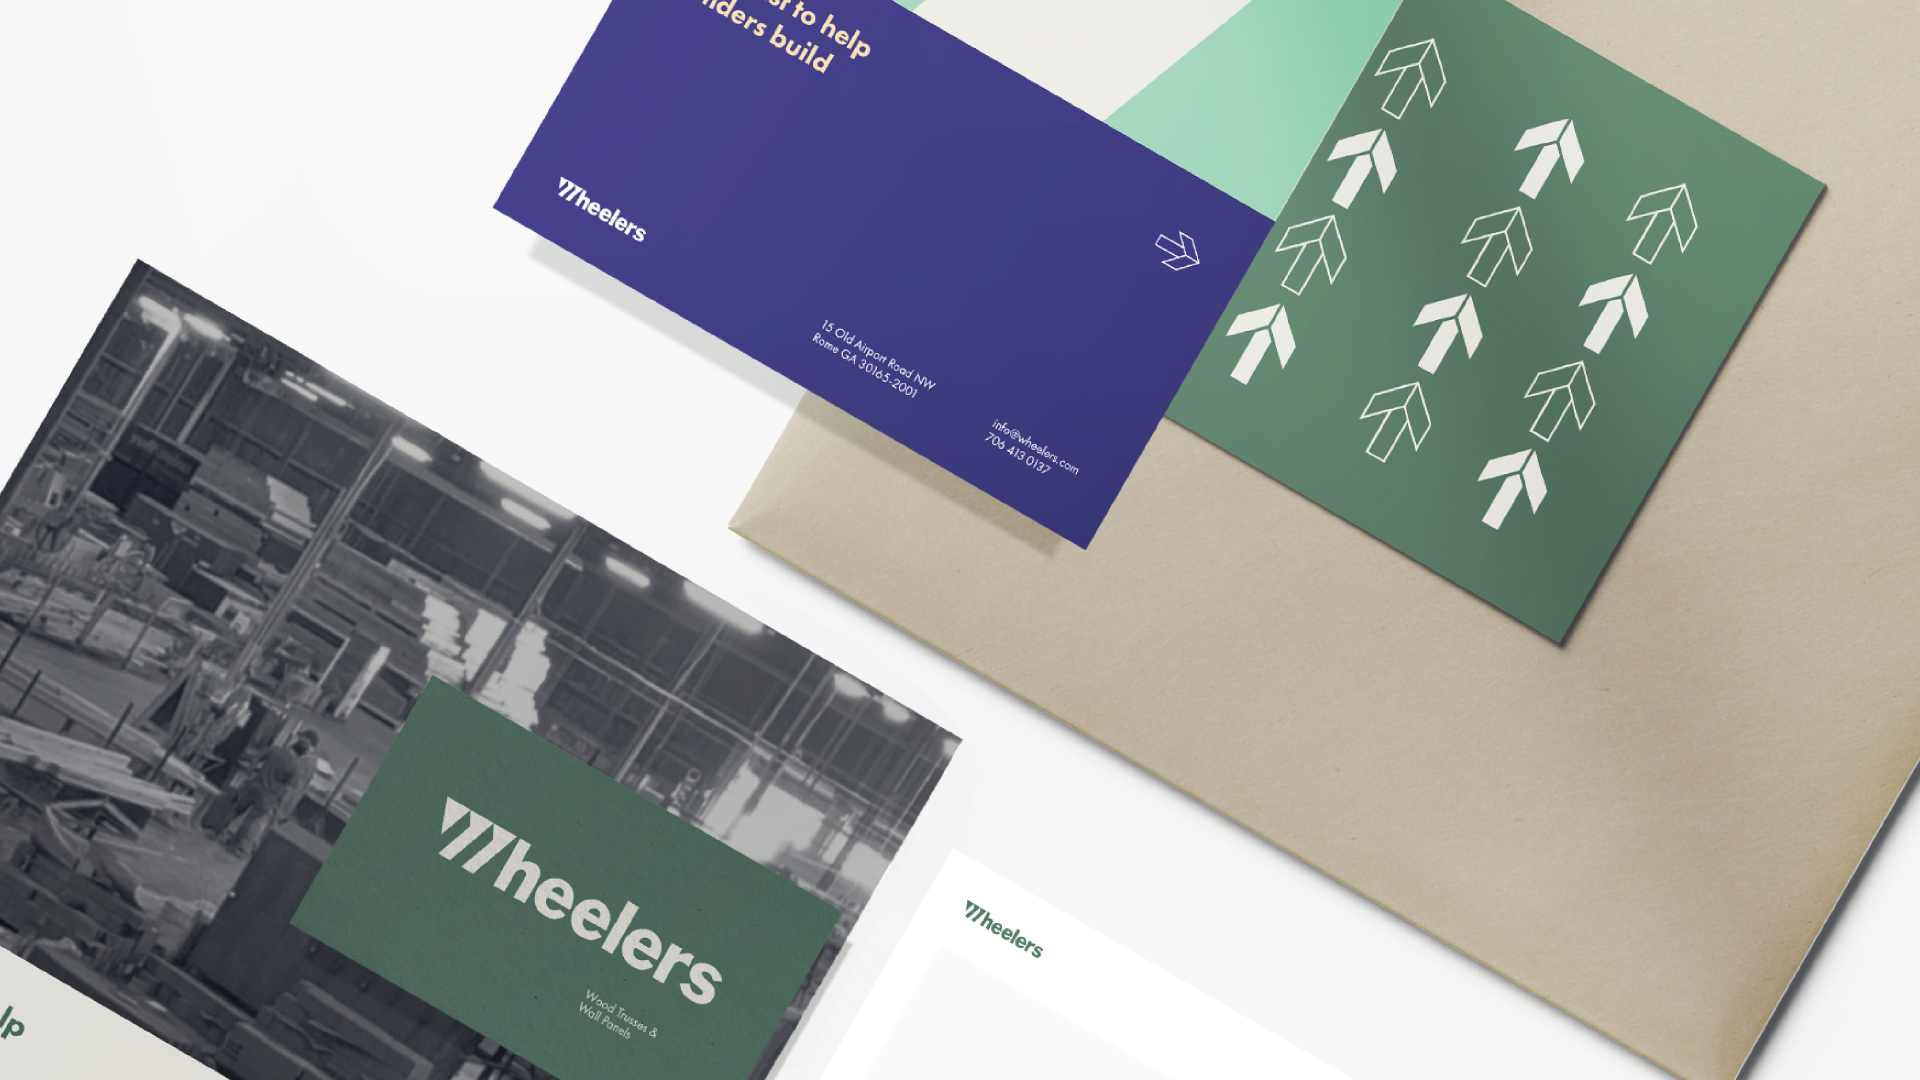 The sales deck includes a custom branded folder, business card, and Wheelers informational book for pitches.